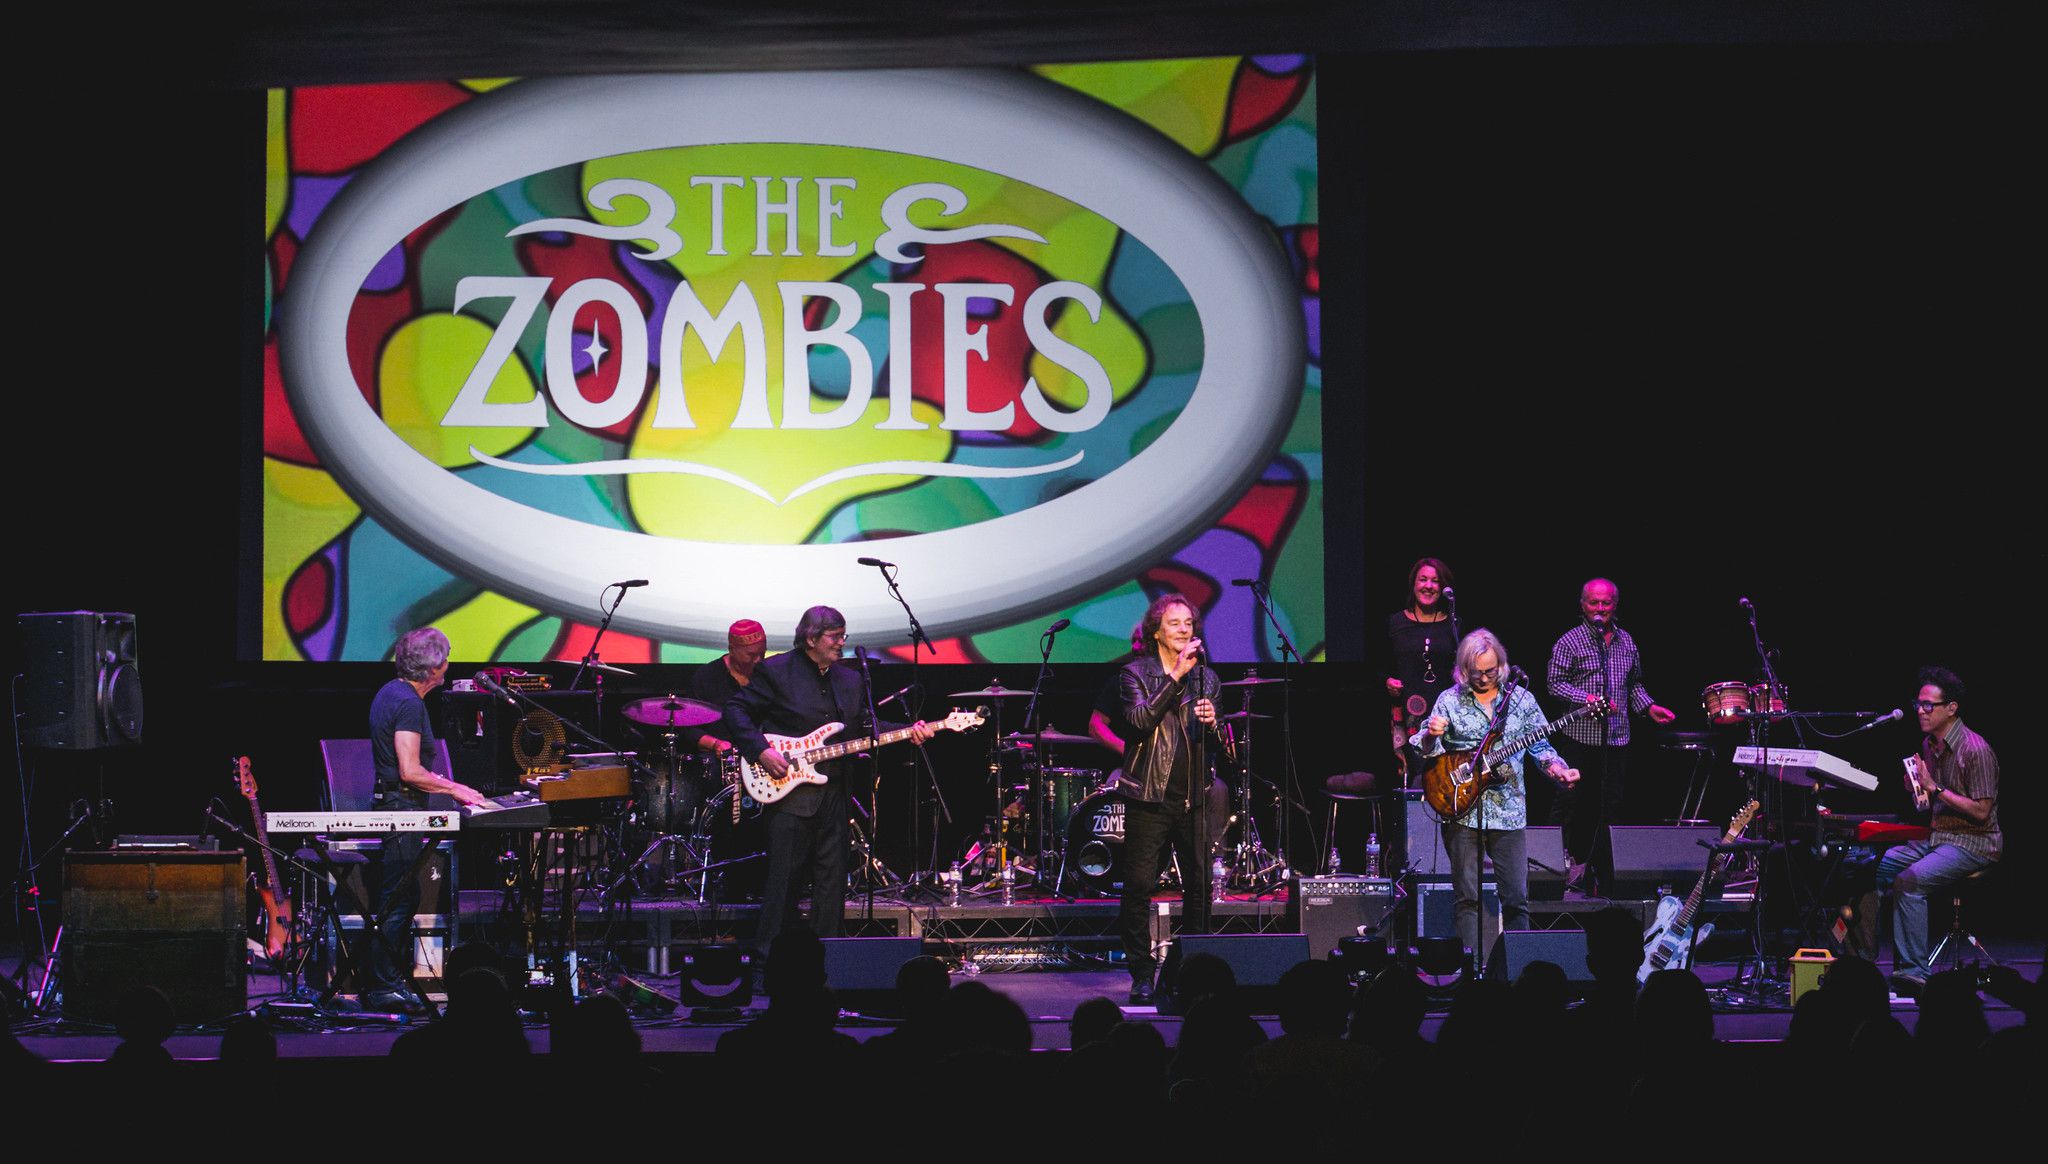 <p>The Zombies are a U.K. band that formed in 1961 and are best known for such exquisite psychedelic hits as "Time of the Season" and “This Will Be Our Year.” The Zombies have not stayed together consistently all these years and have become inactive on more than one occasion. Still, their current touring lineup contains two of the band’s founding members, Rod Argent and Colin Blunstone, so if you enjoy their music and are in the U.K. or Warsaw, <a href="https://www.thezombiesmusic.com/tour">this is the time to go see them</a>. If that conflicts with your plans, they will be playing on the “Flower Power” cruise in March 2025.</p>